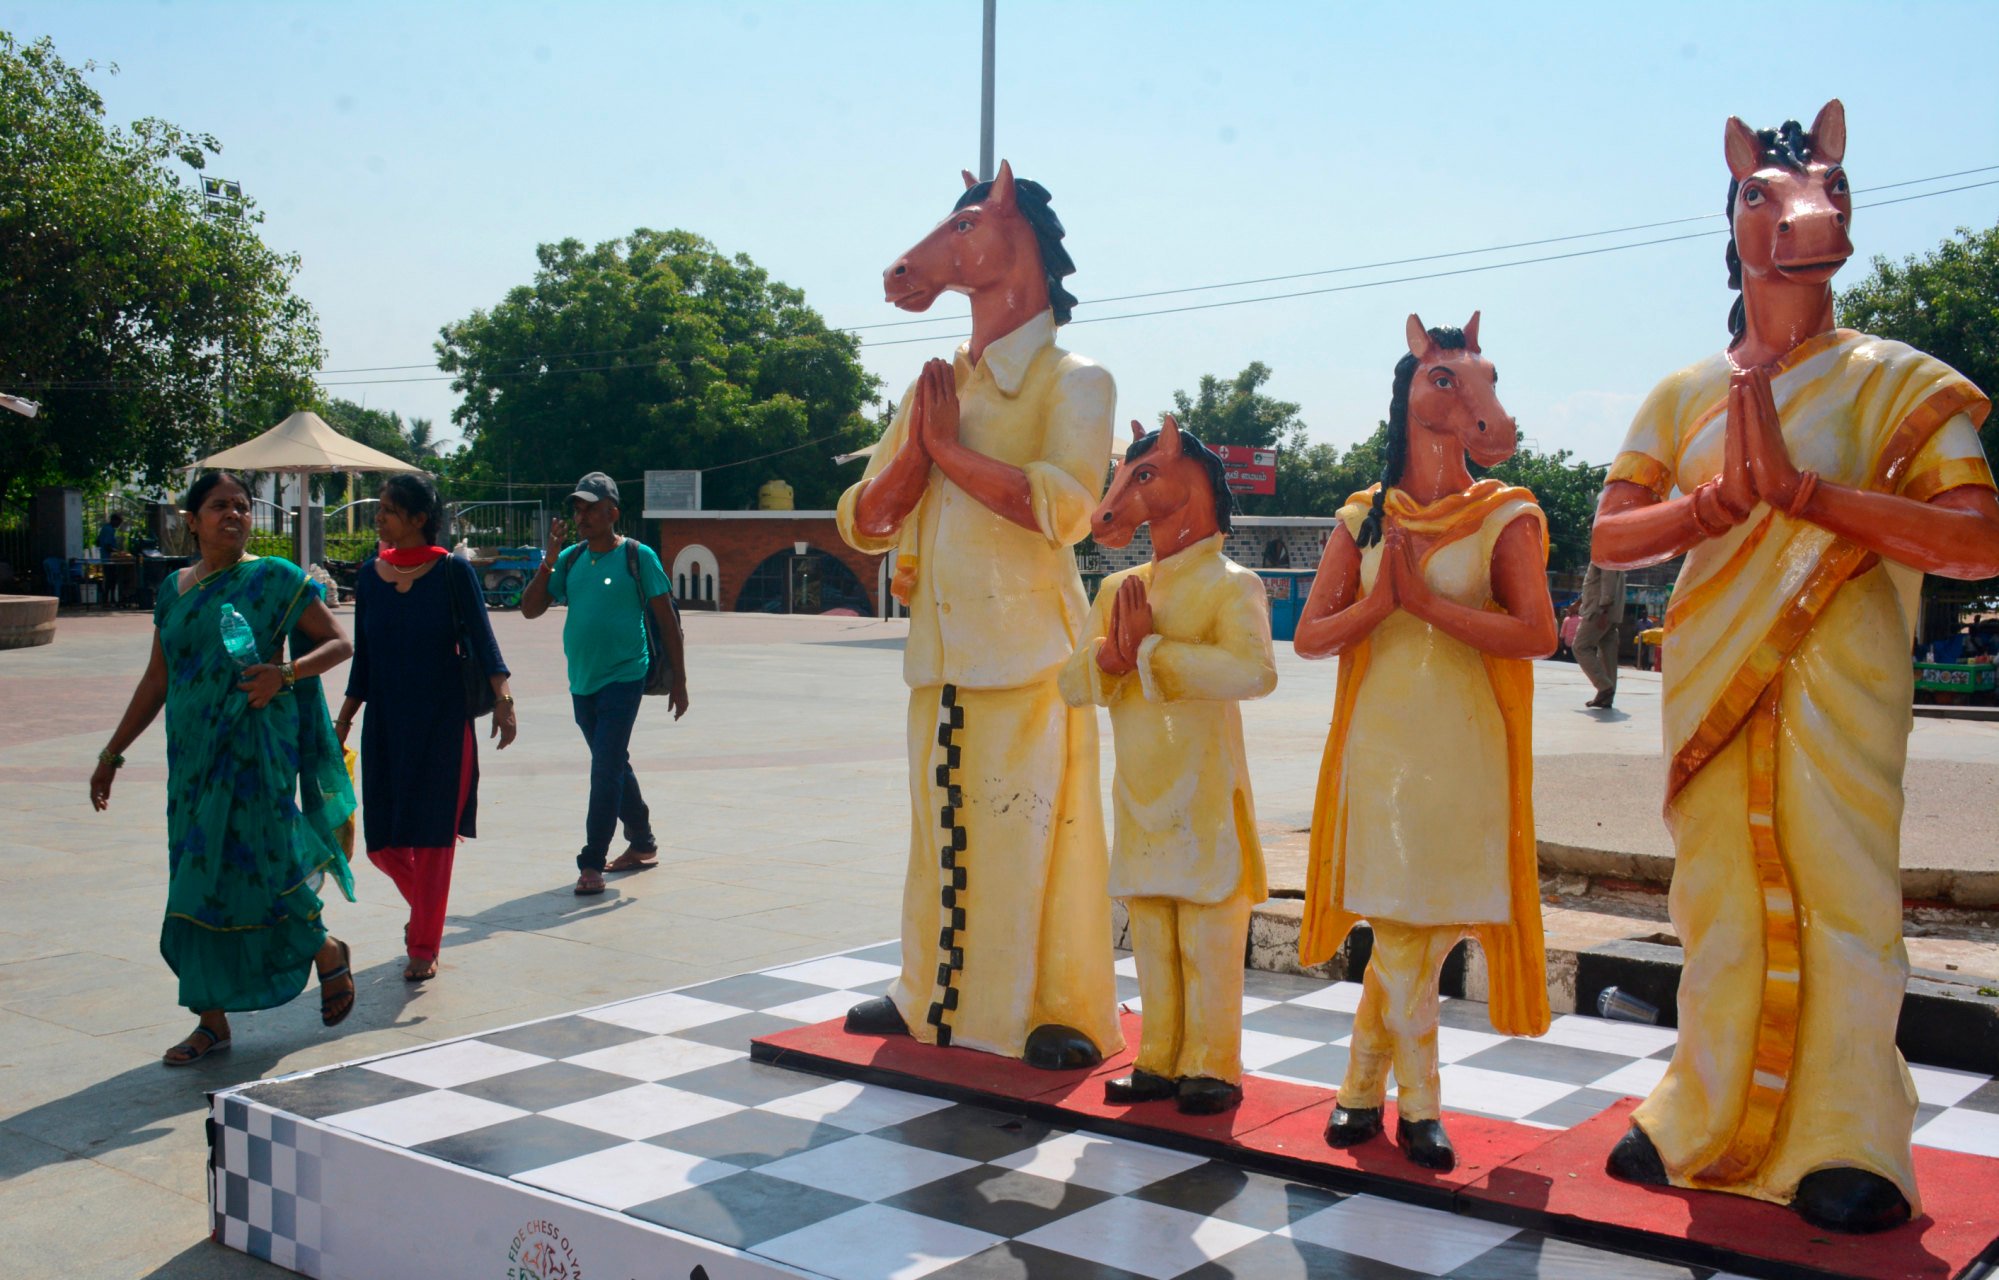 With 44th Olympiad a week away, Tamil Nadu is going to town with chess